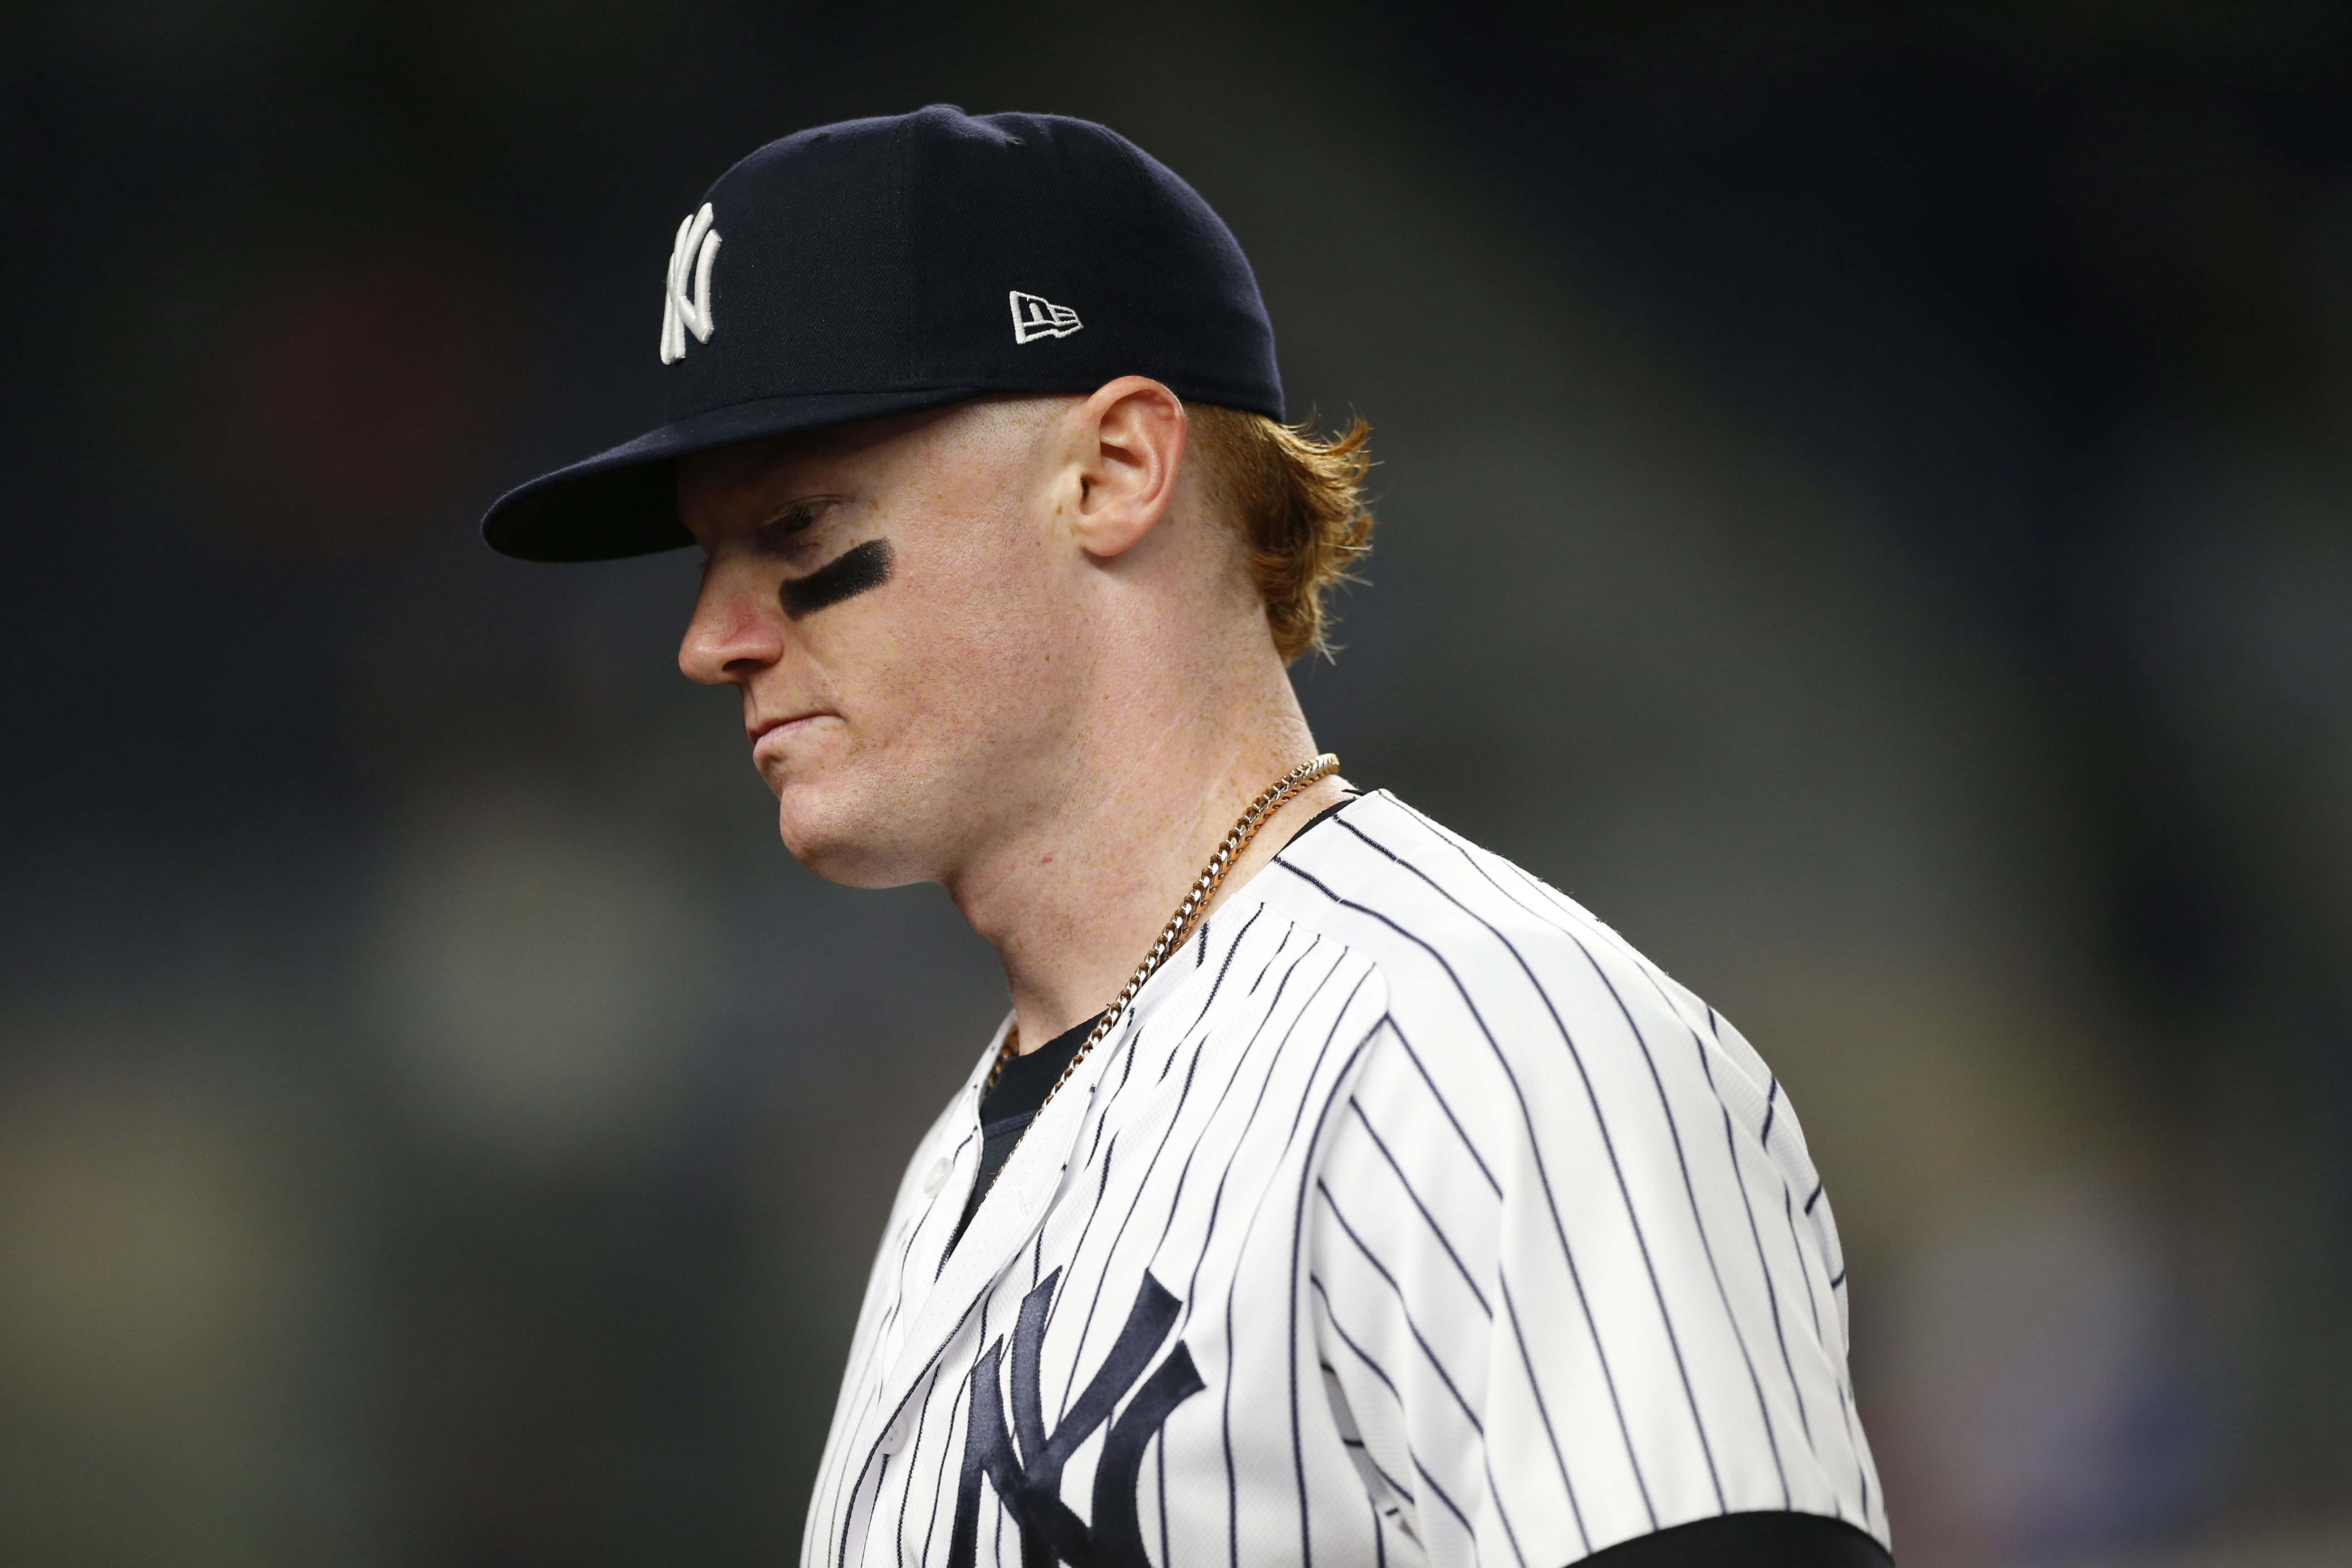 About Clint Frazier's Lush Locks: Will the Yankees Let Their Hair Down? -  The New York Times